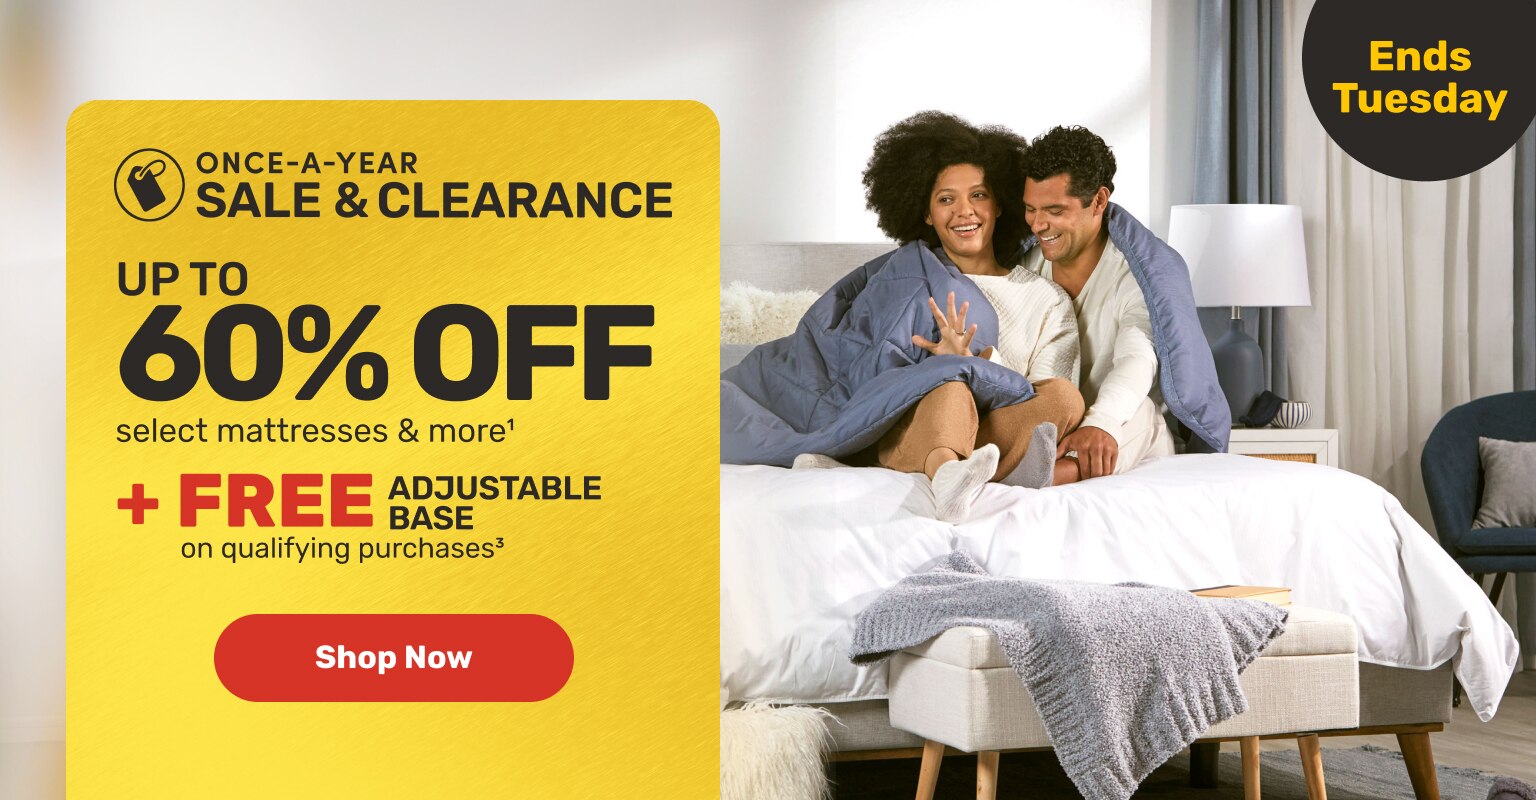 Mattress Firm  Best Prices-Top Brands-Fast and Free Delivery